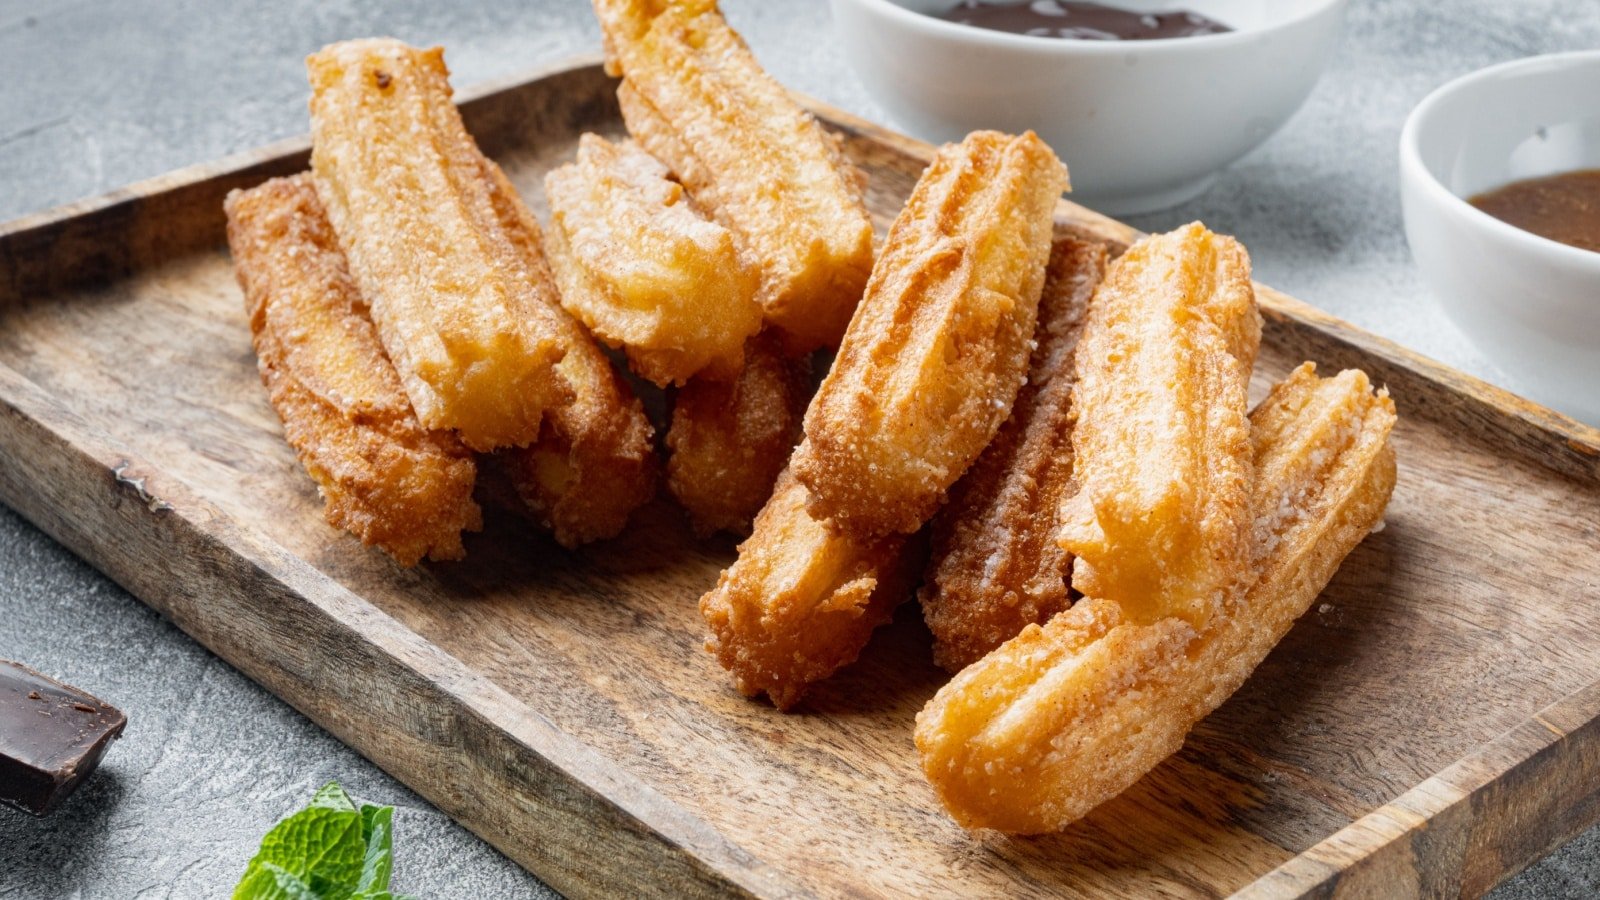 <p><span>Moving on to Spain, churros are a staple street food that can be found in almost every Spanish city. These fried dough pastries coated in sugar and cinnamon are often served with hot chocolate for dipping, making them the perfect indulgent snack.</span></p><p><span>Churros are a testament to Spain’s penchant for comfort food – simple yet delightful. Whether it’s a chilly morning or a late-night craving, nothing hits the spot quite like these warm, crispy pastries generously dipped in rich, velvety hot chocolate. It’s not just a snack; it’s a treat that brings the essence of Spanish hospitality right to your tastebuds.</span></p>